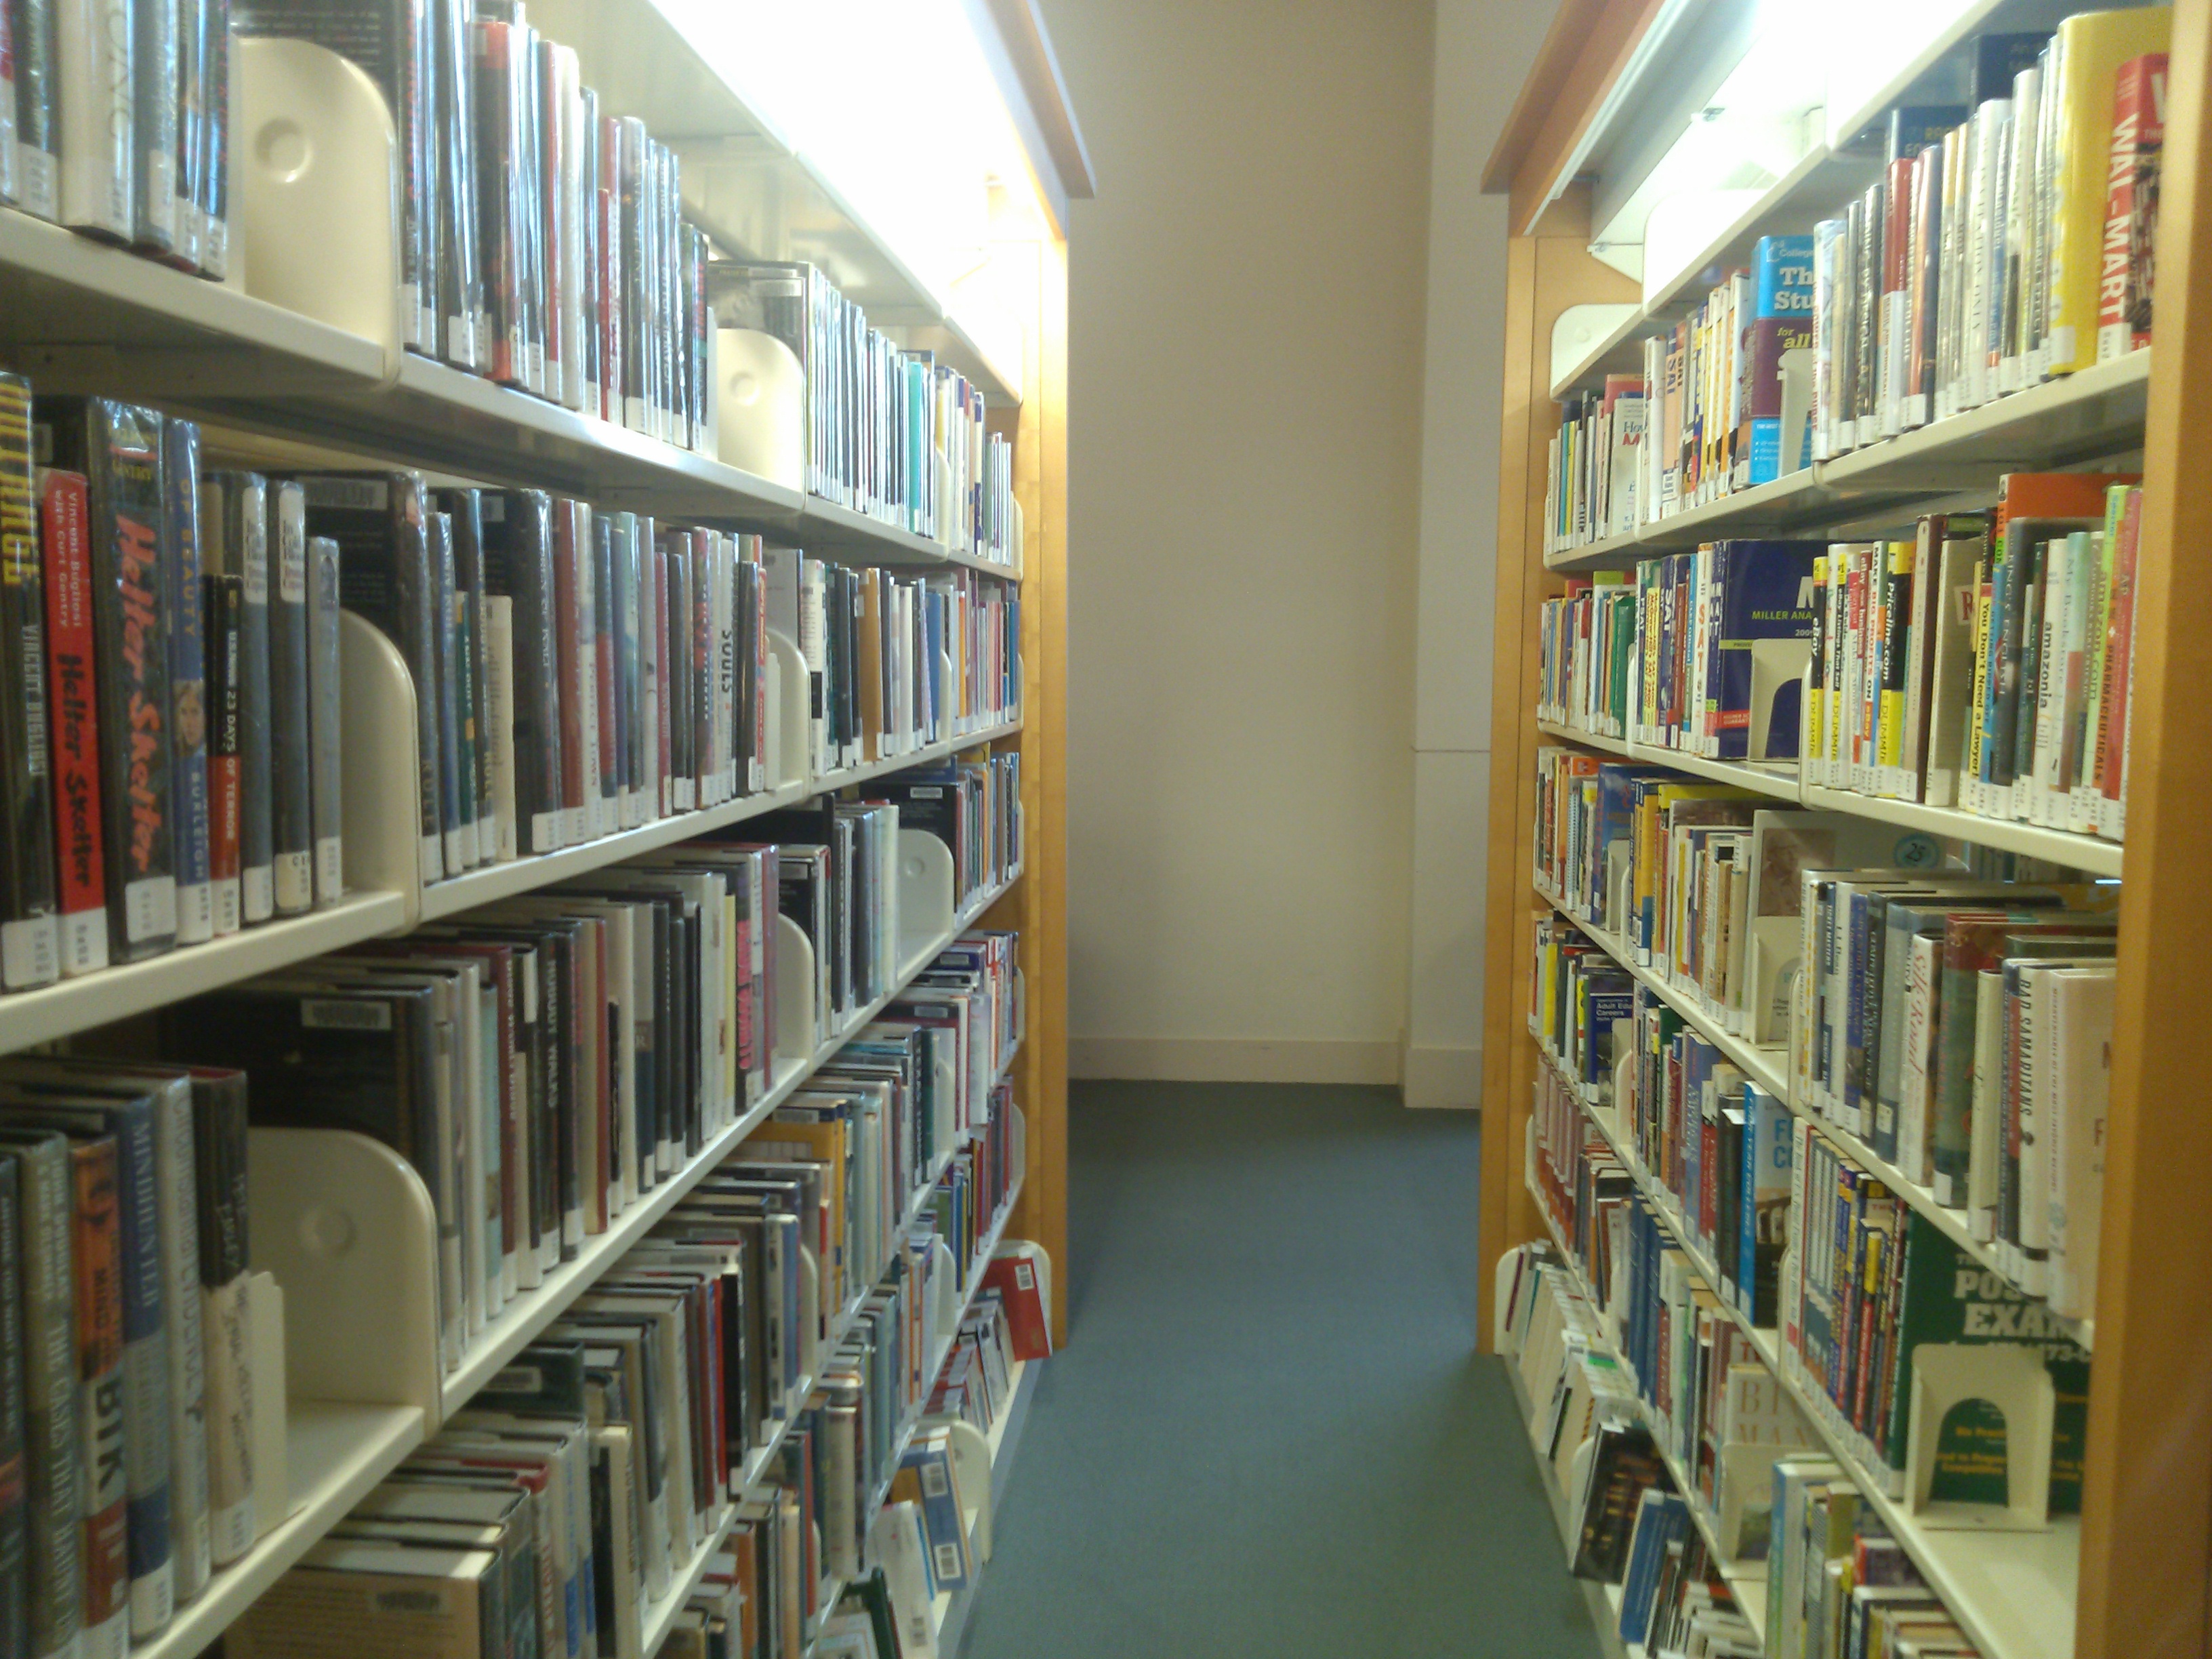 Beatley Library is close to Cameron Station